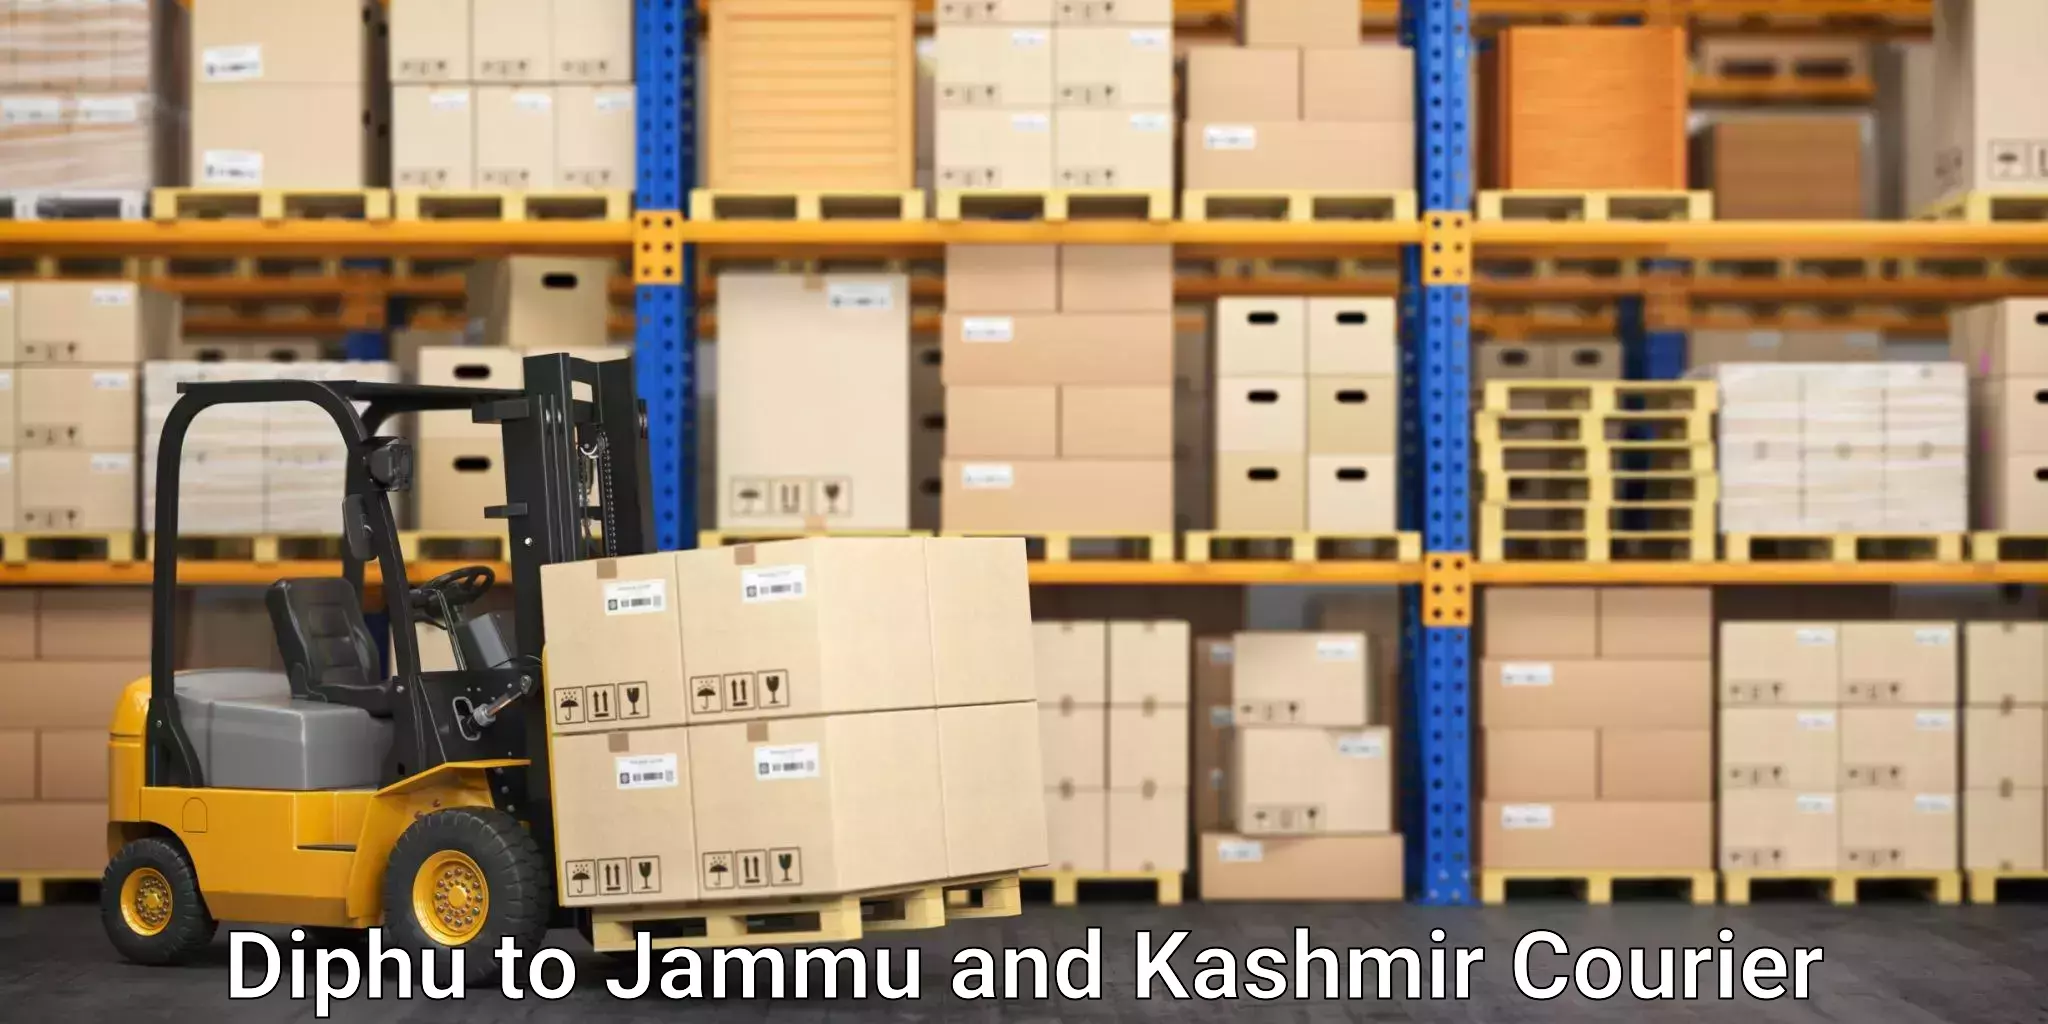 Expedited shipping solutions Diphu to Budgam